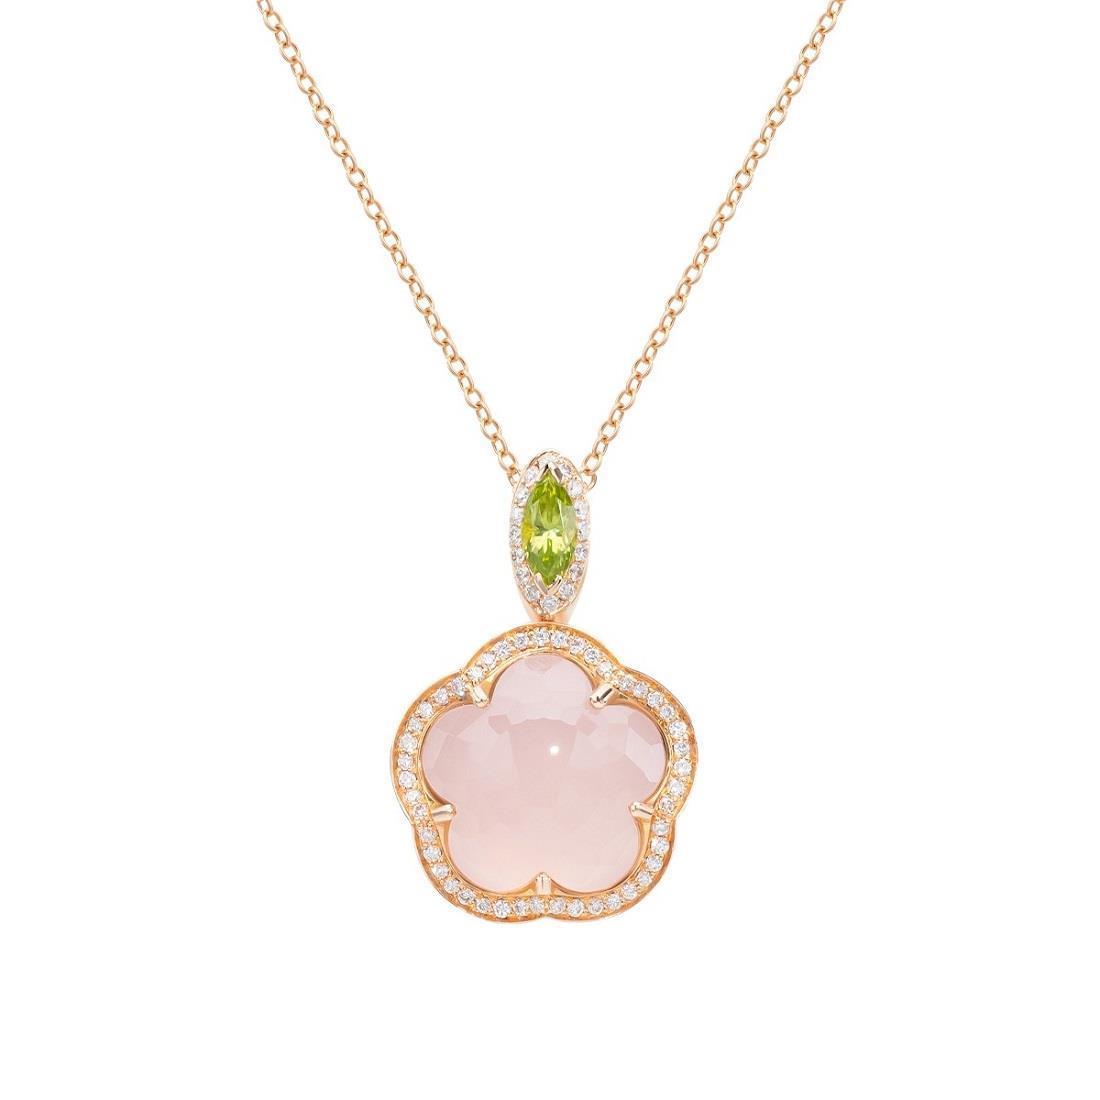 Bon Ton necklace in red gold with rose quartz and diamonds - PASQUALE BRUNI